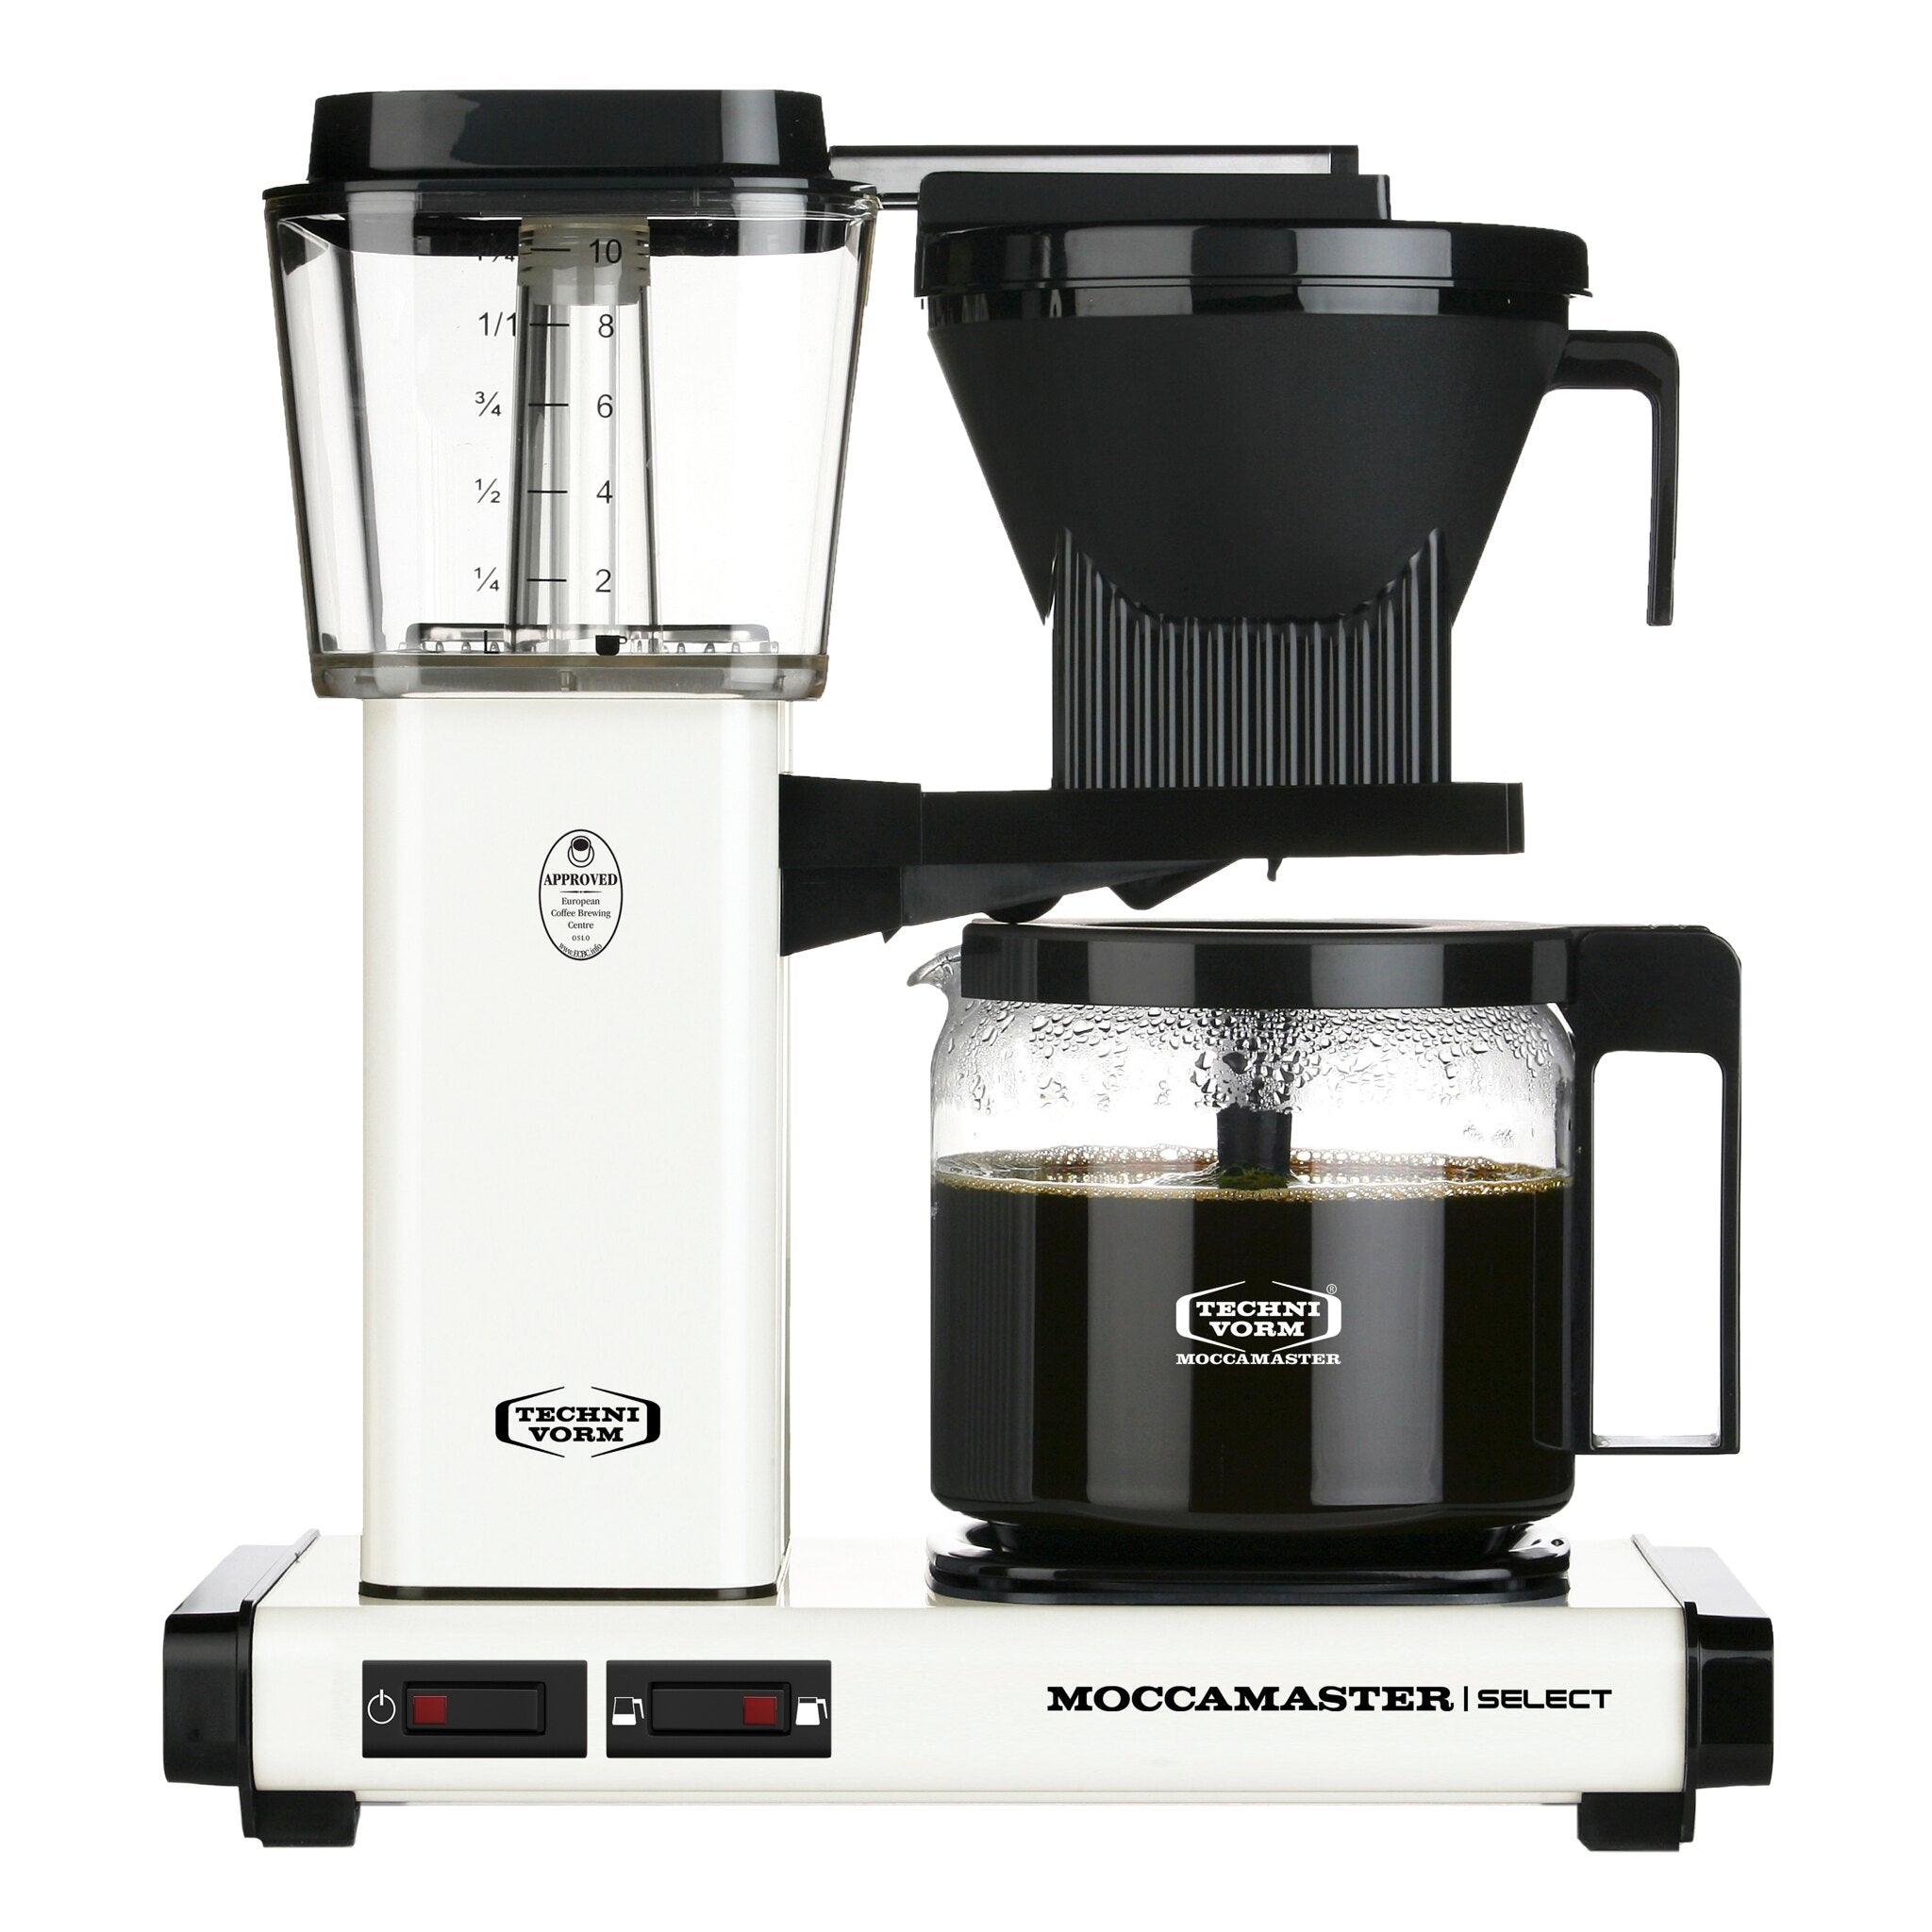 Moccamaster filter coffee machine – CAPTN Coffee KBG Select